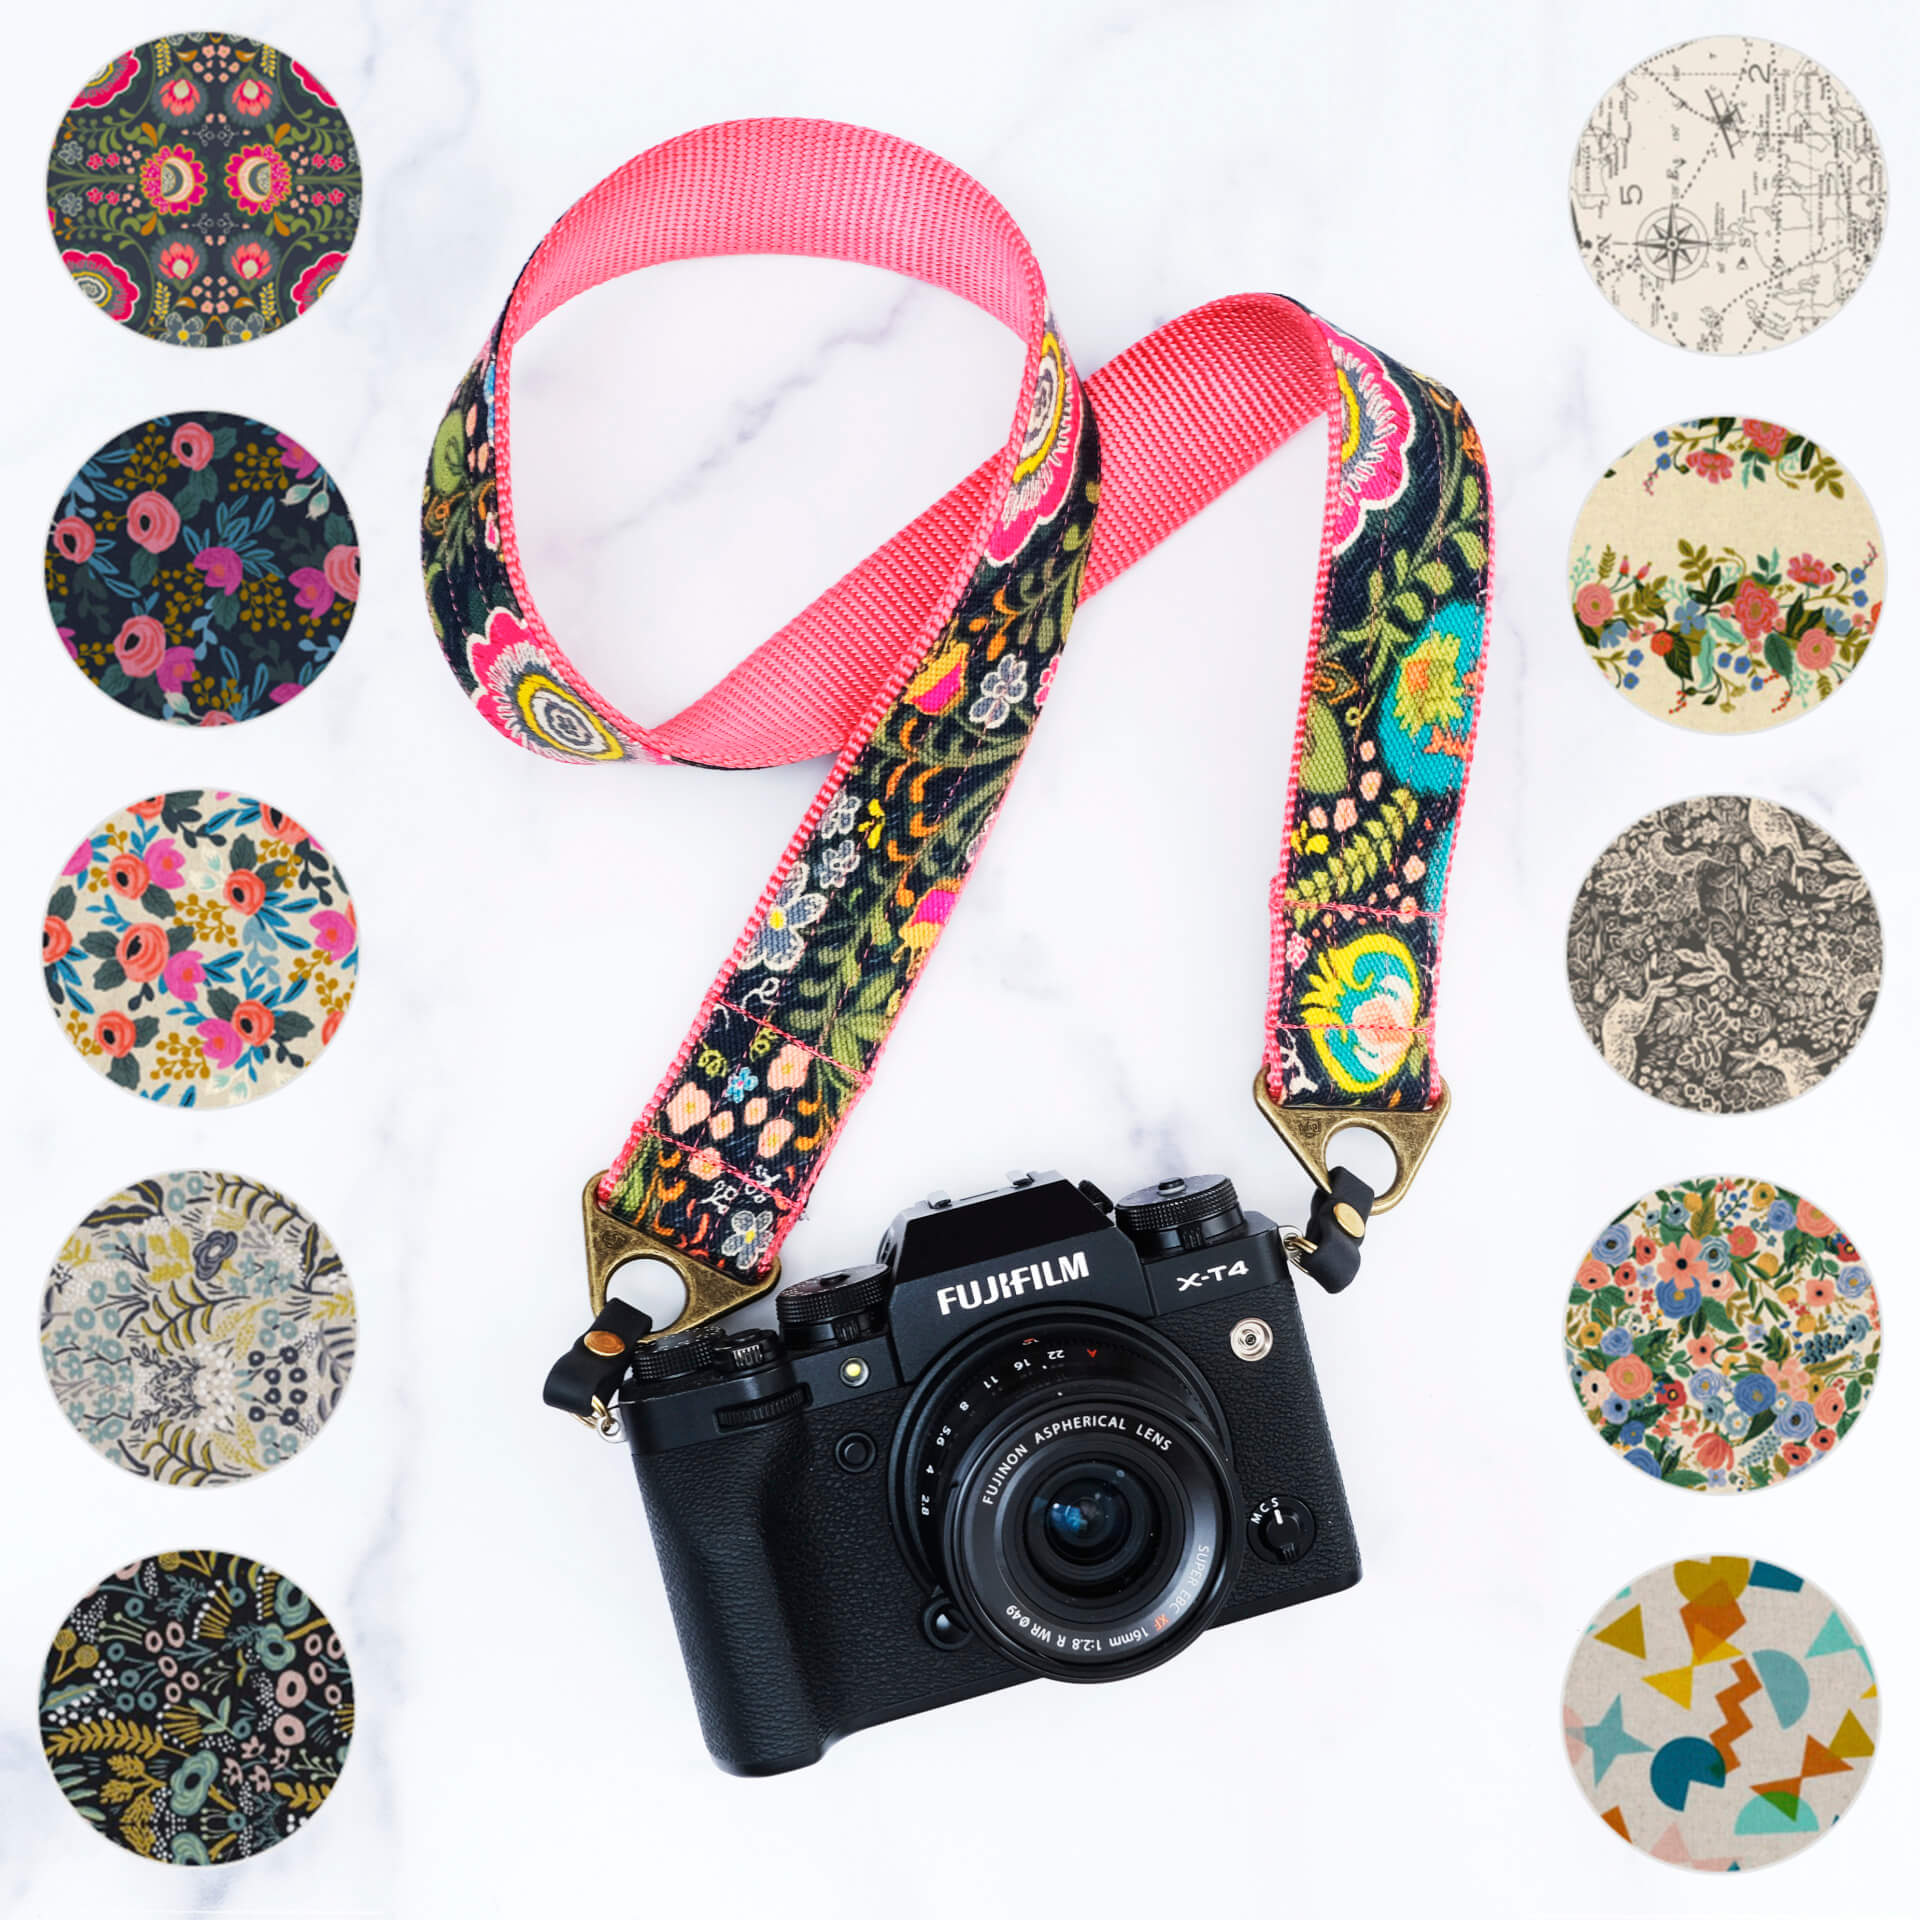 Luggage Straps Travel Accessories for Women Kawaii cat Suitcase Belts  Luggage Connector Straps